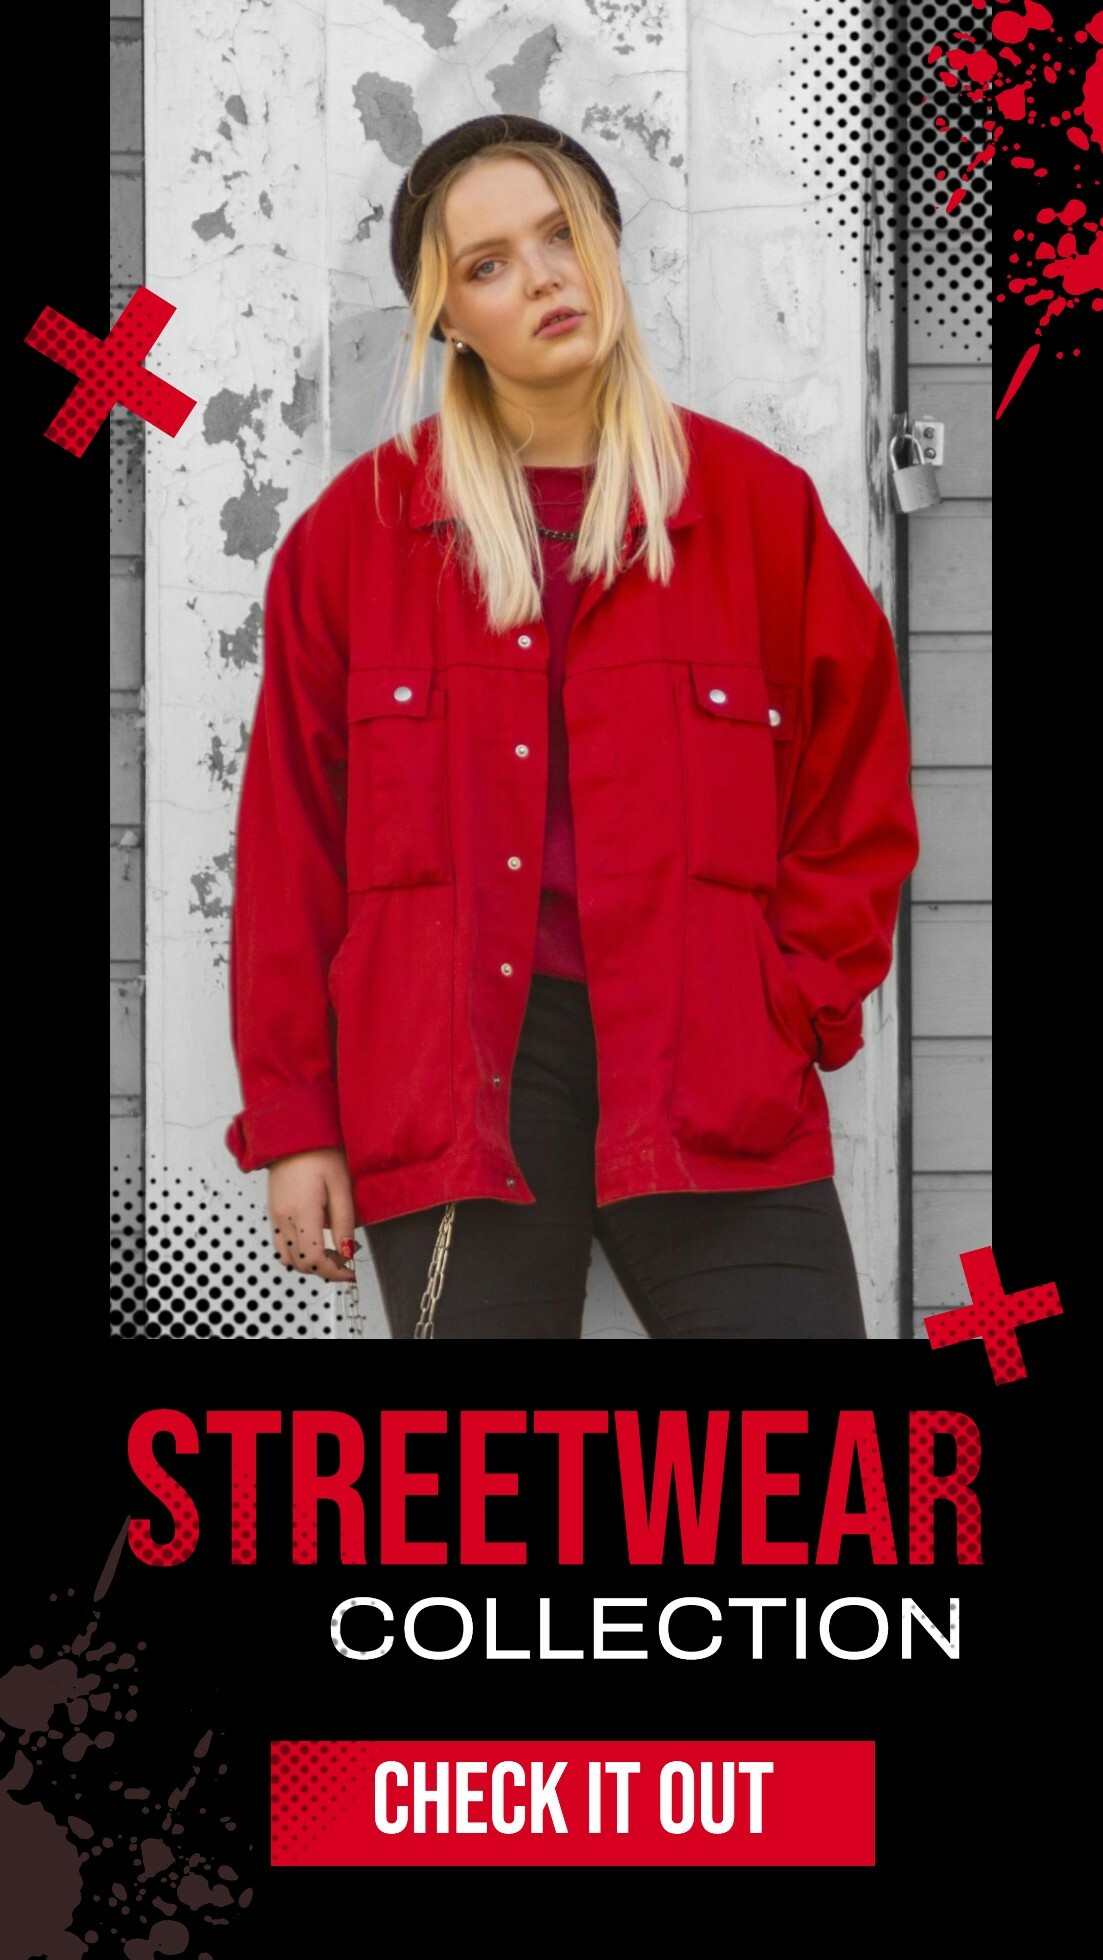 Streetwear Collection Retro Pixel Black Red for Instagram Story